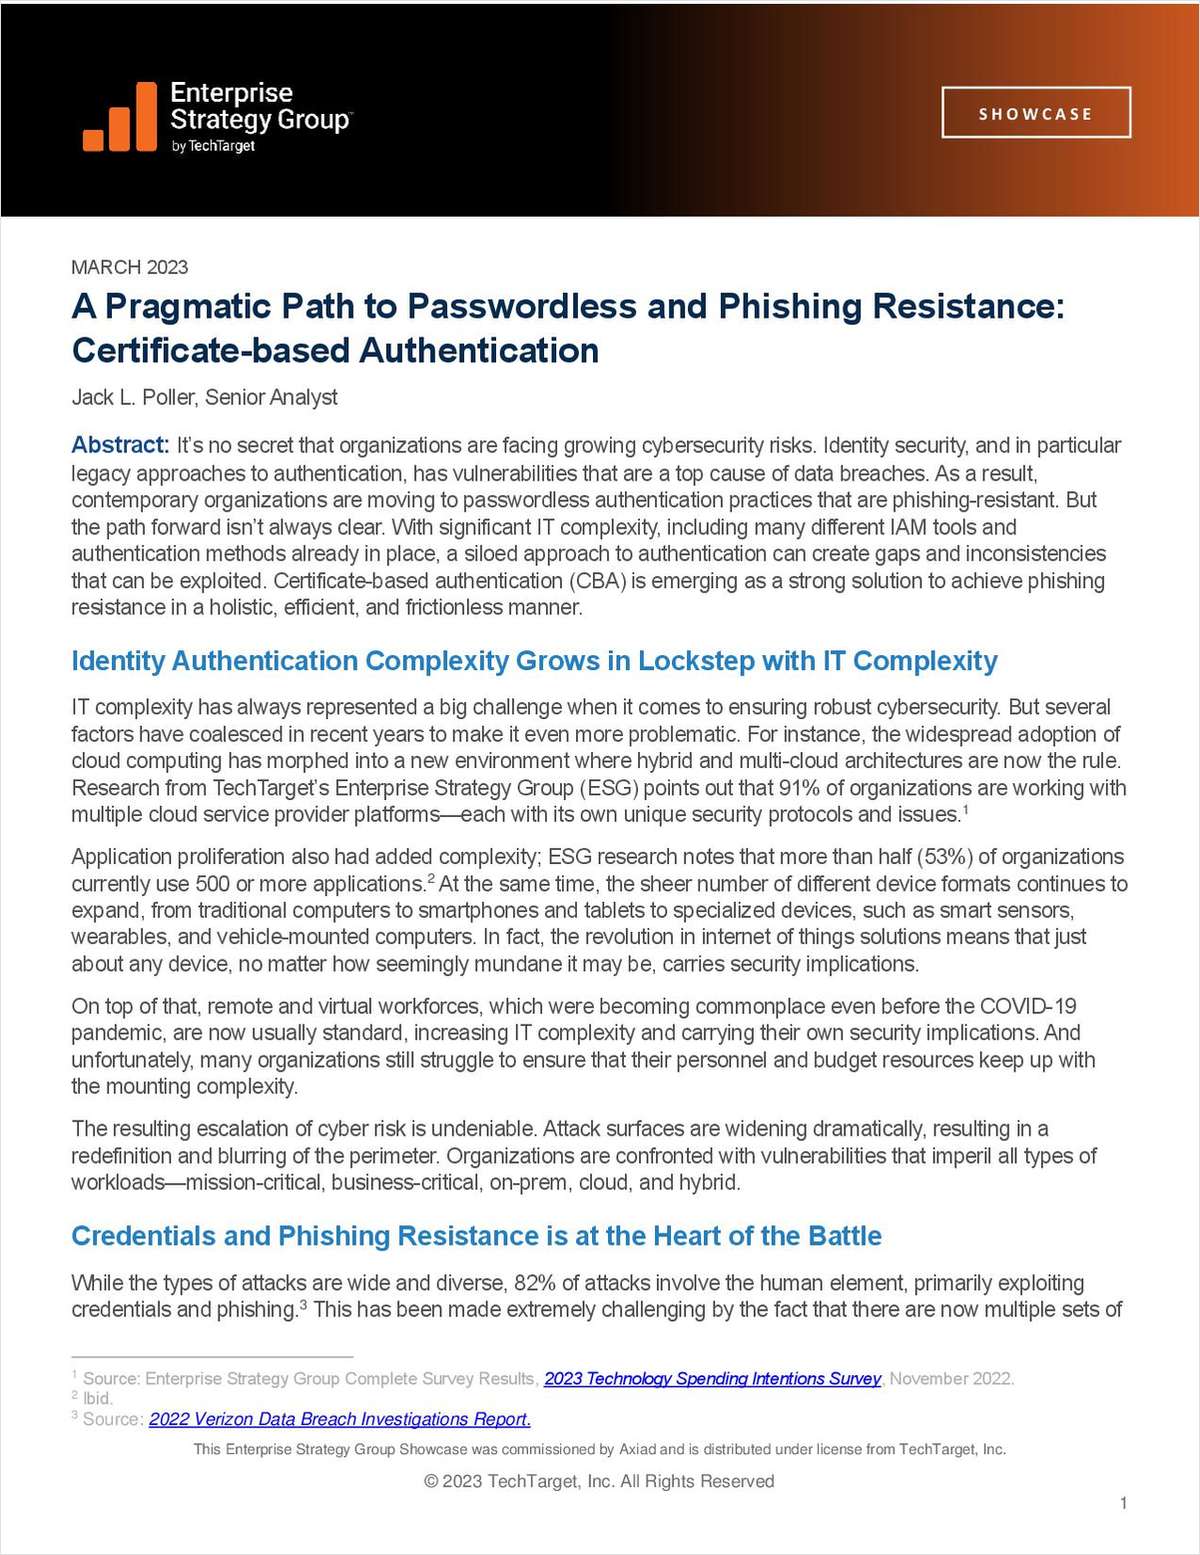 A Pragmatic Path to Passwordless and Phishing Resistance